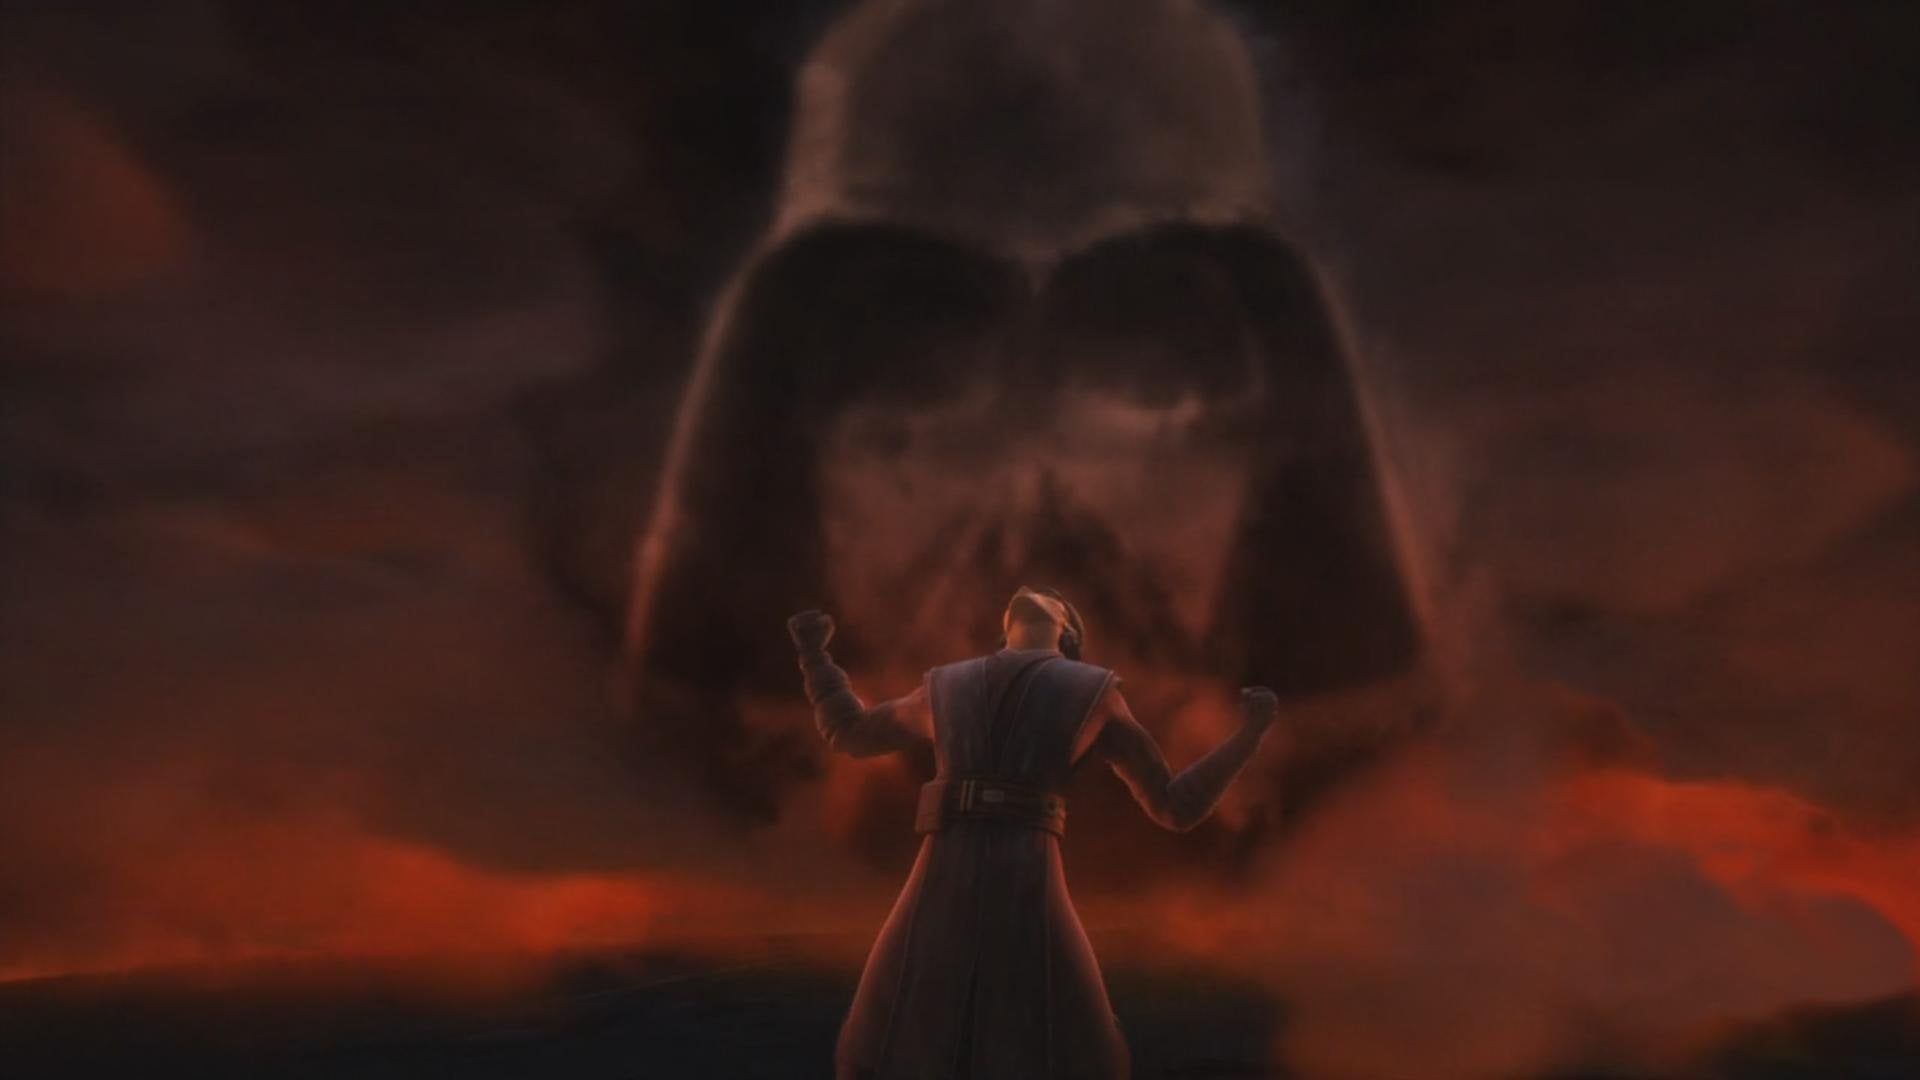 HD Wallpaper of the Darth Vader allusion from last week's Clone Wars episode